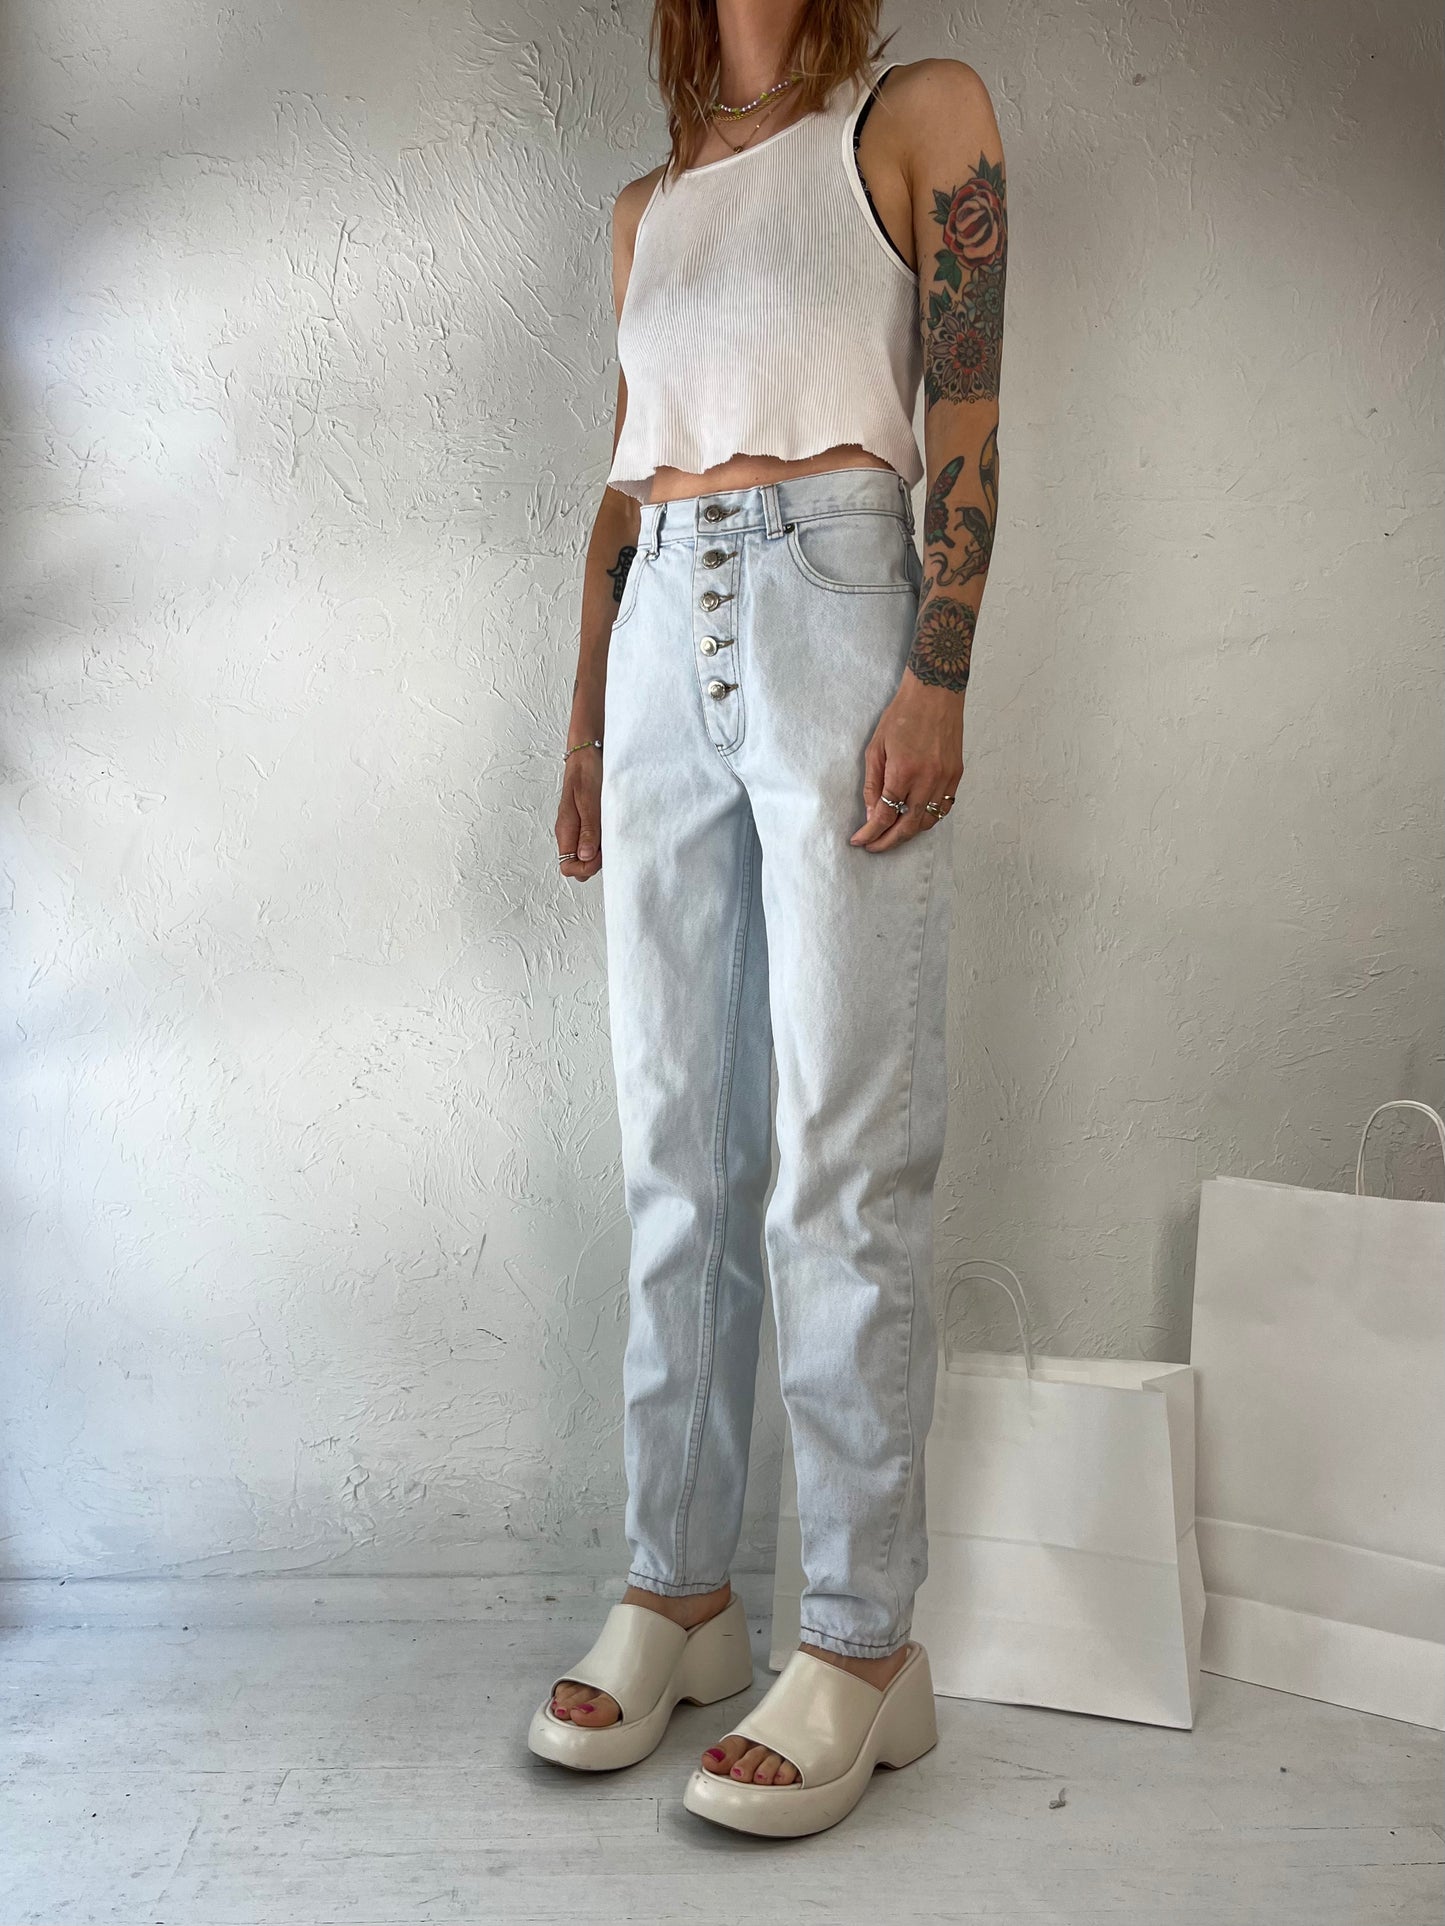 90s 'Lawman' Light Wash Western High Rise Jeans / Small